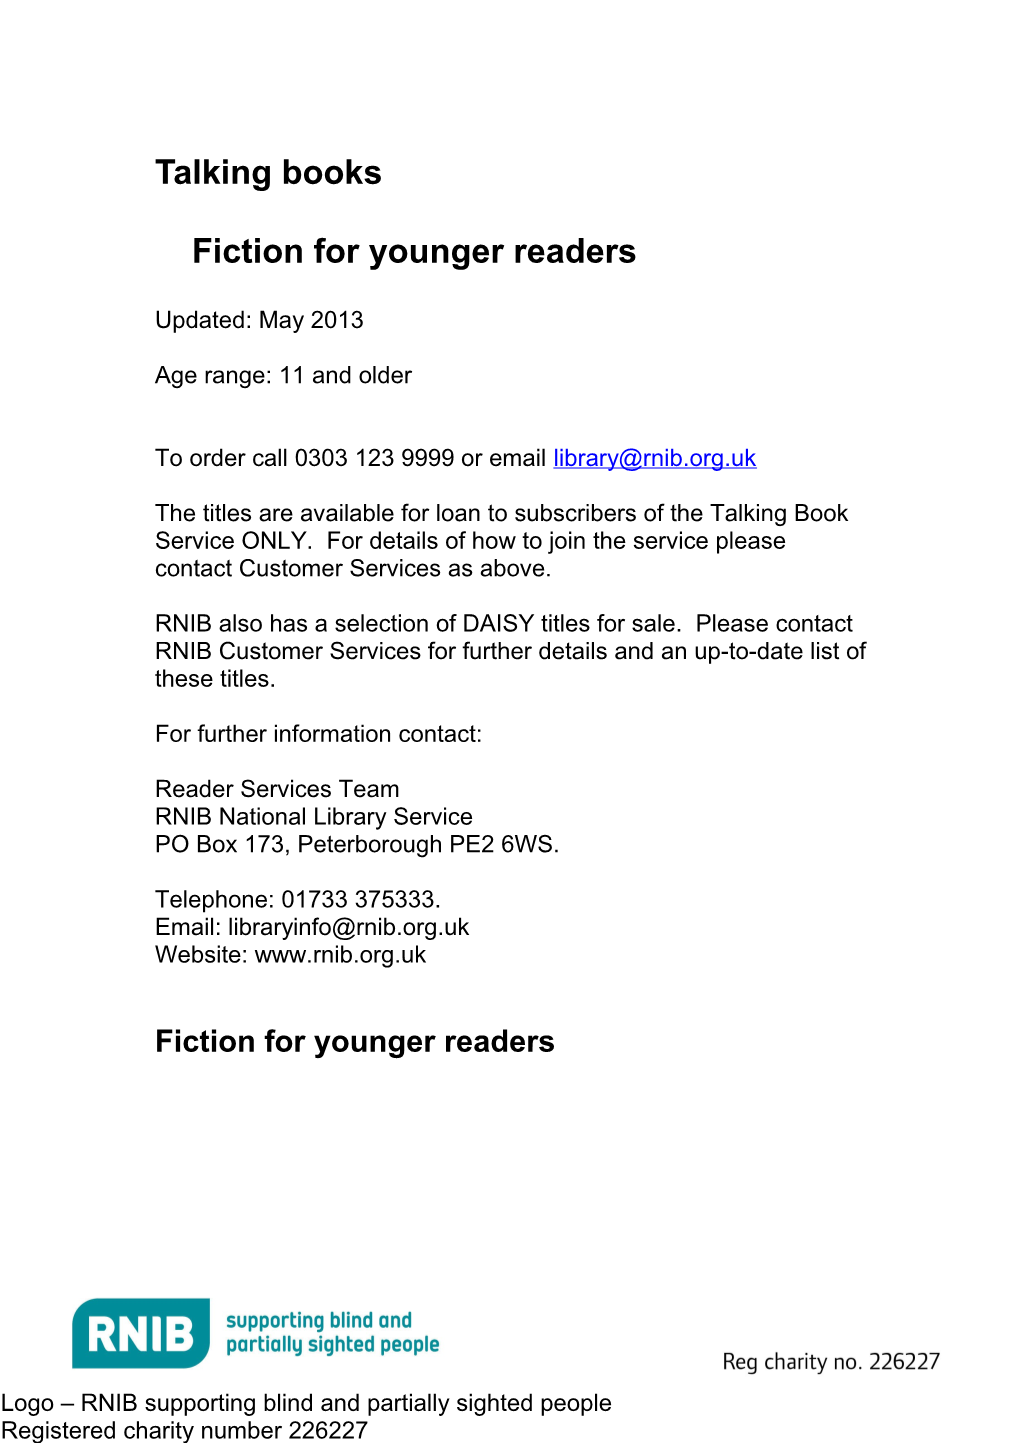 Fiction for Ages 11 and Older on Talking Book (Word, 200KB)